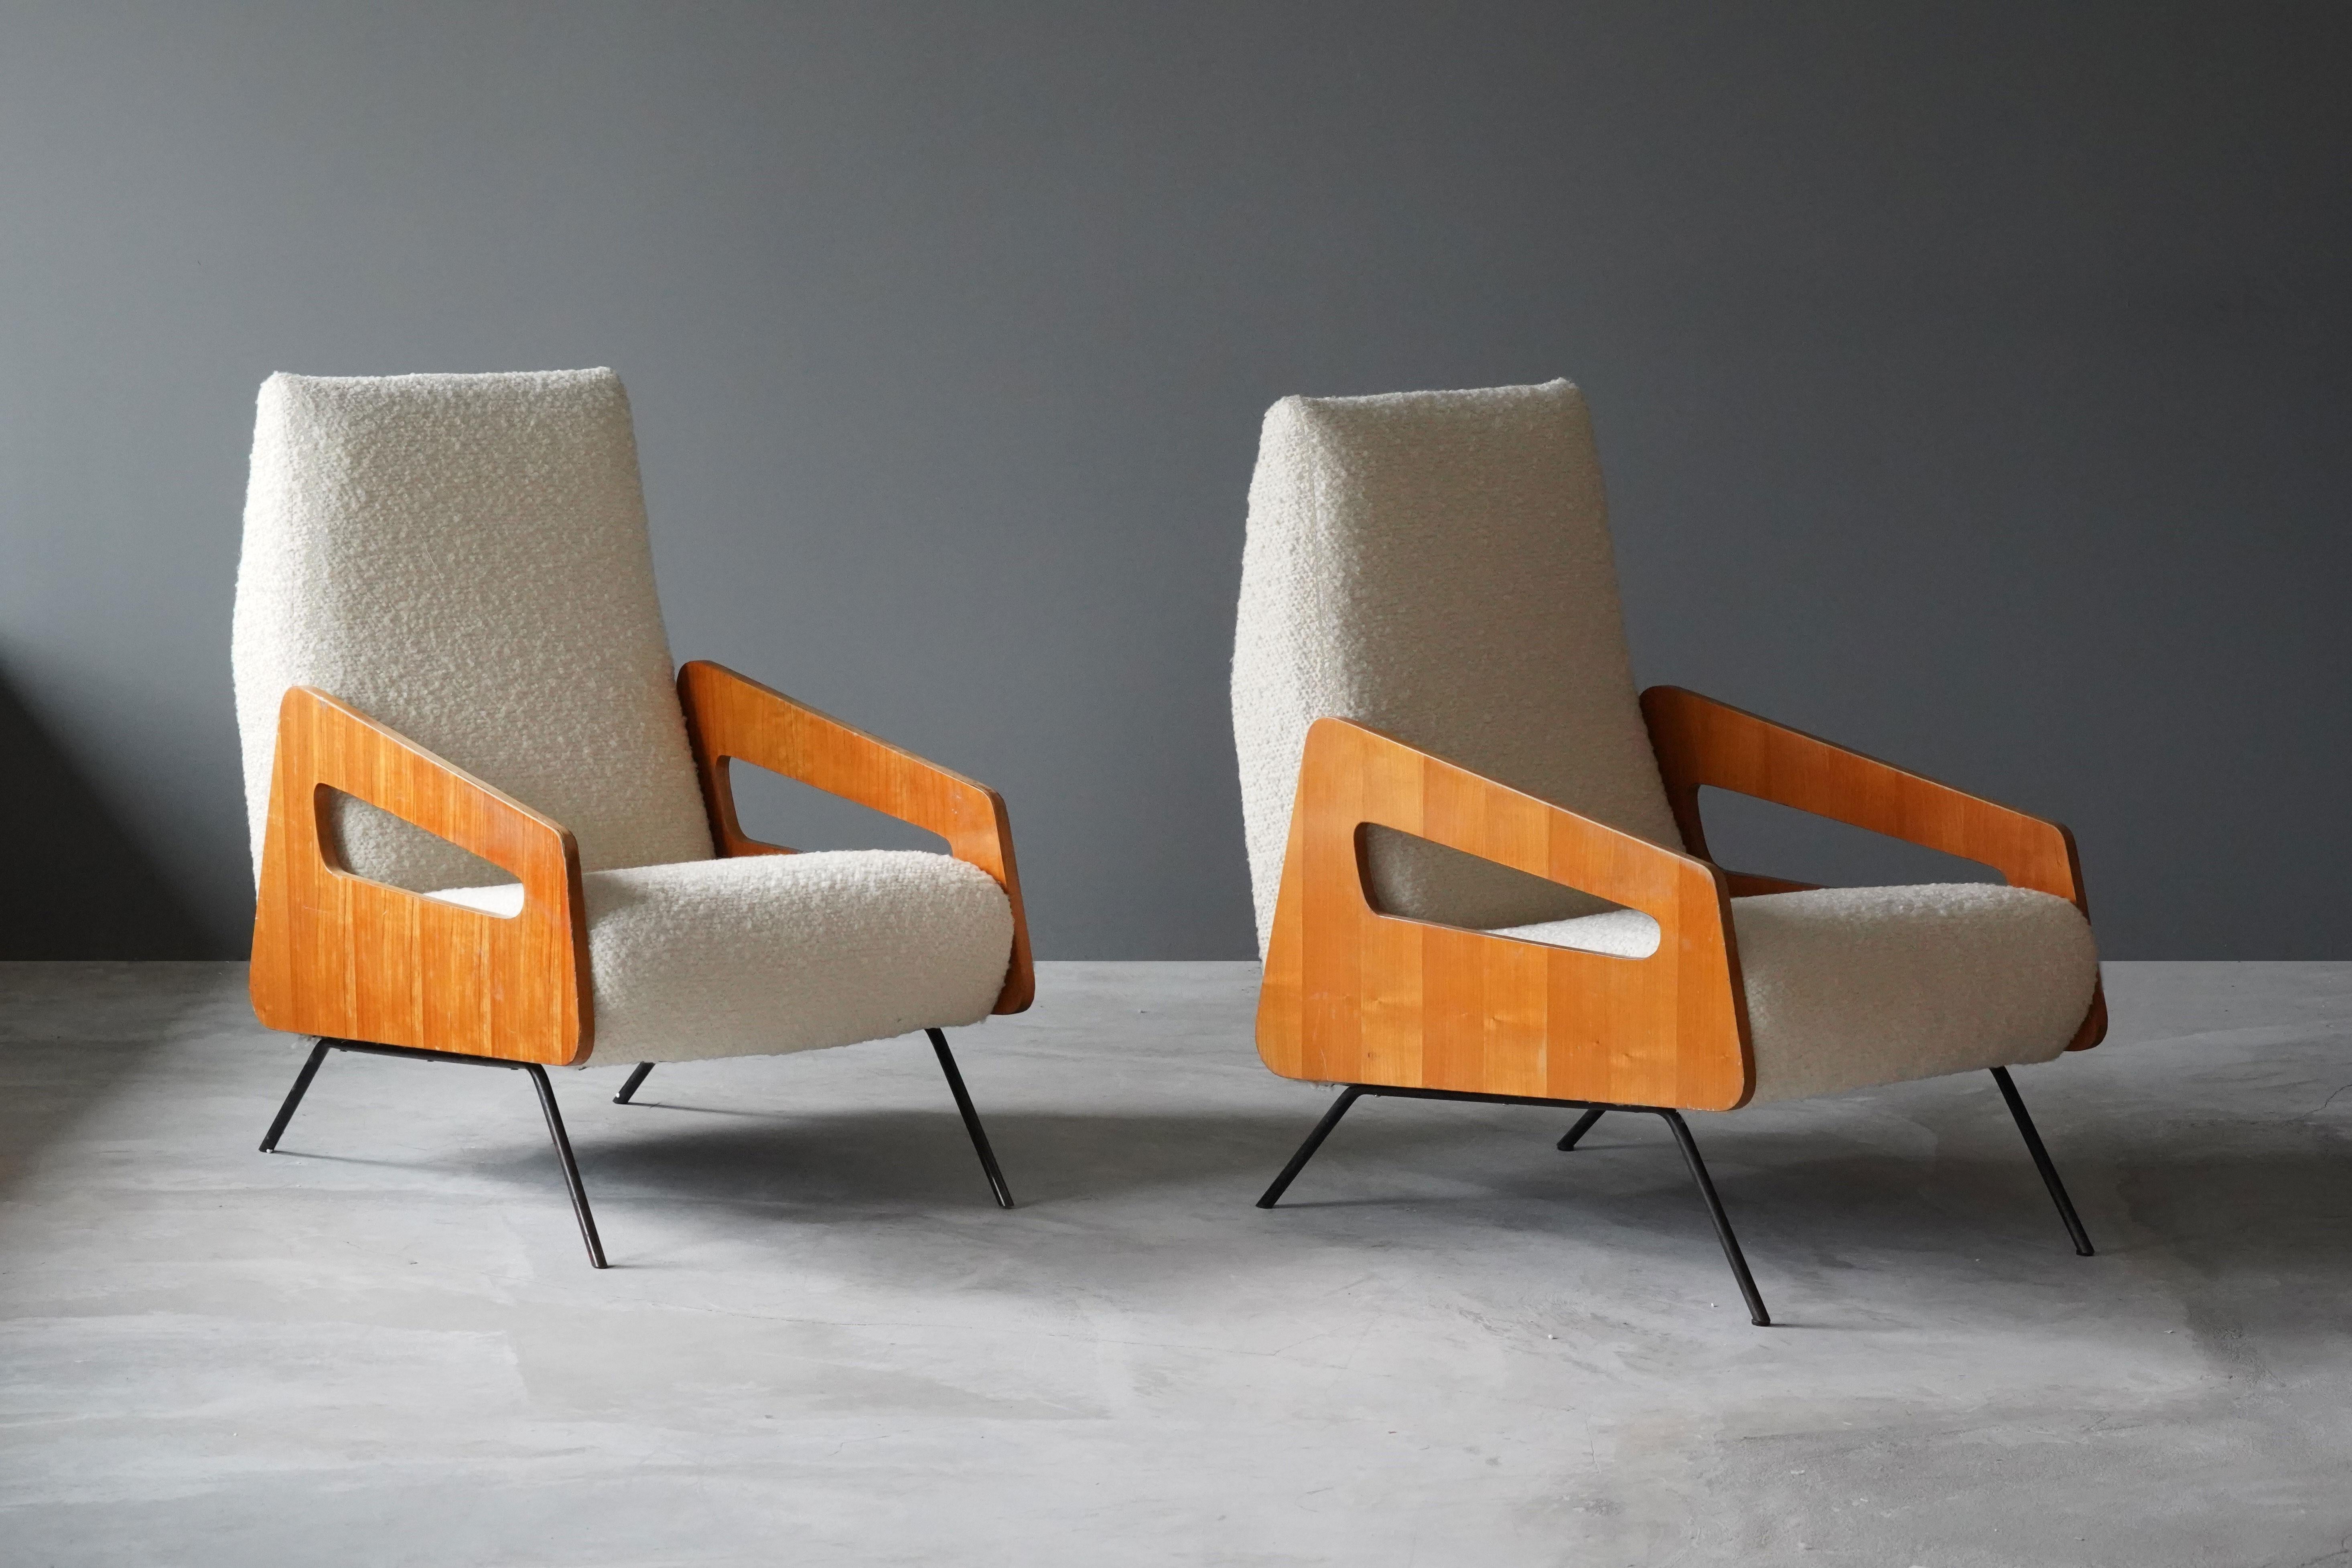 A pair of highly modernist lounge chairs. Designed and produced in Italy, 1950s. Features an interesting mix of materials, brand-new white high-end bouclé, wood, and lacquered steel.

Other designers of the period include Gio Ponti, Franco Albini,